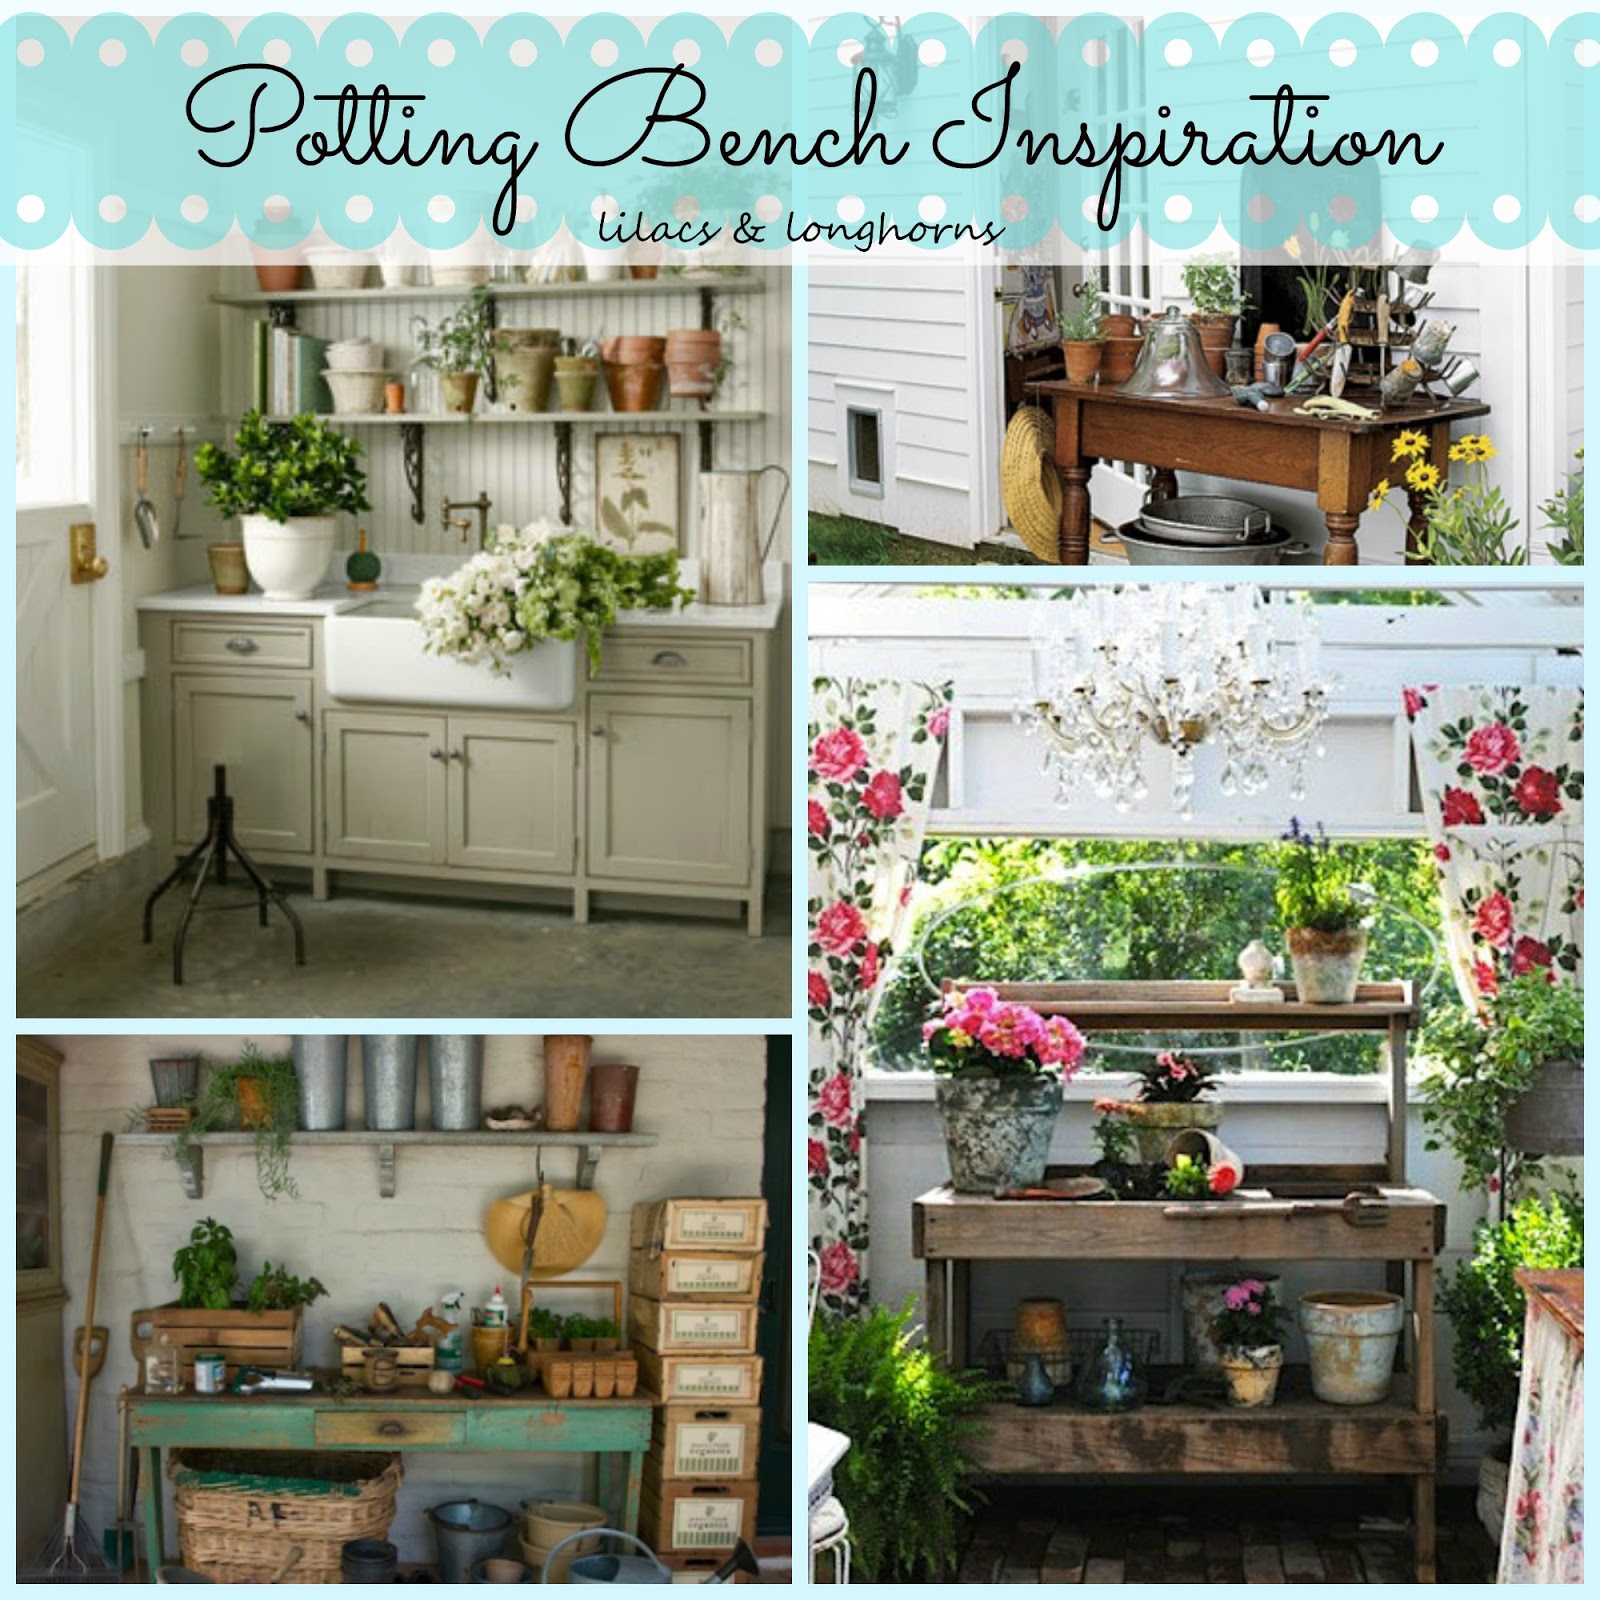 There are so many styles and ways to create a potting bench without 